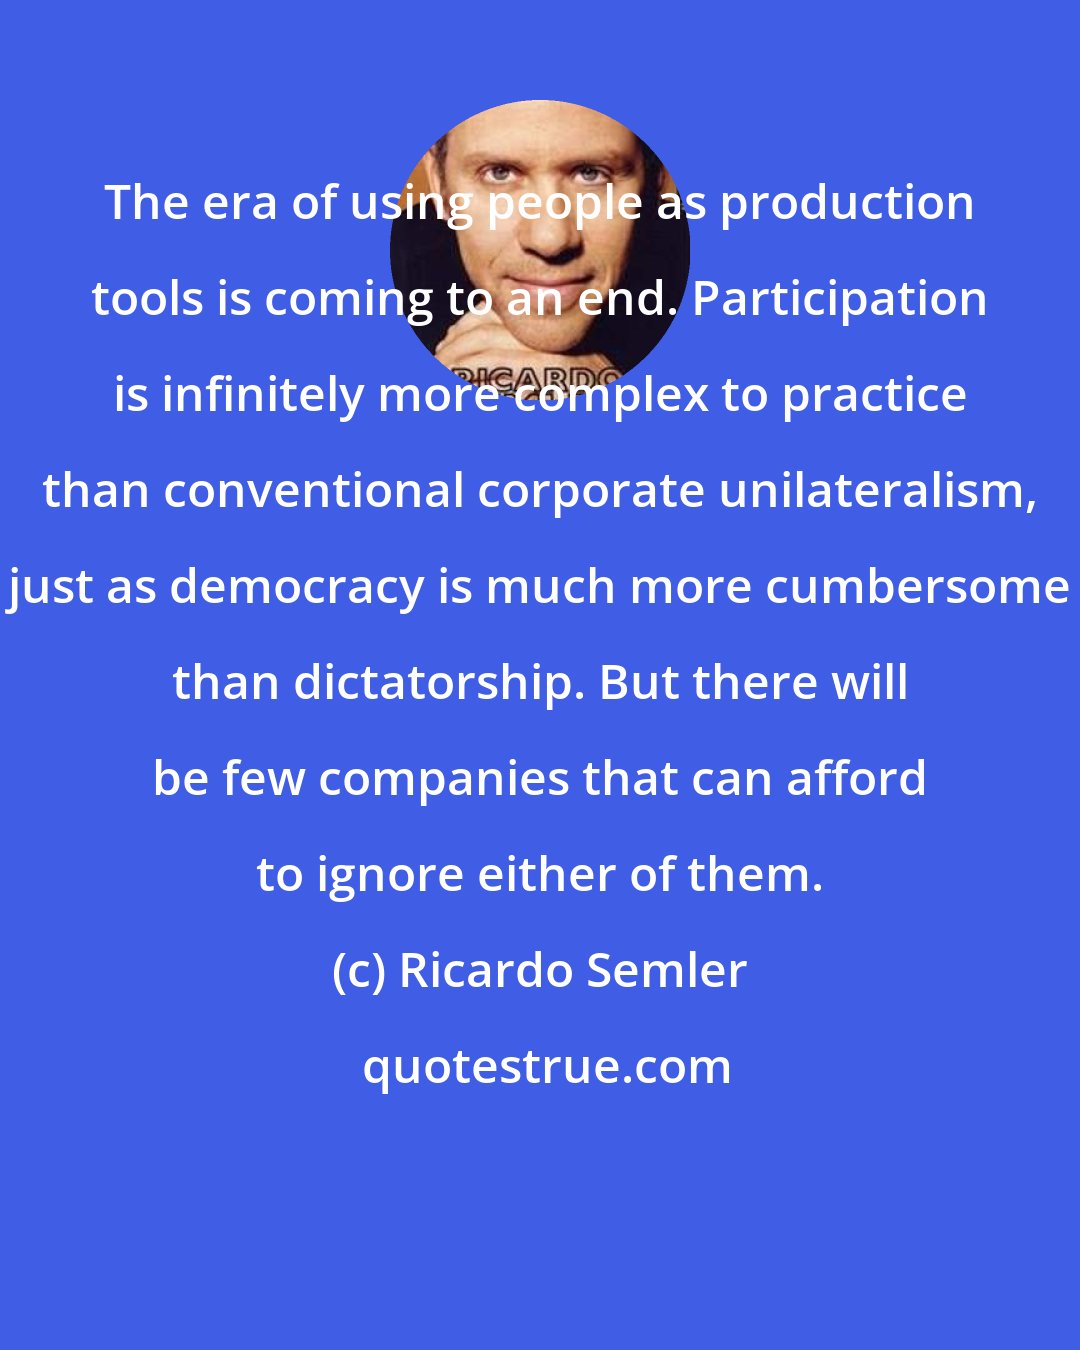 Ricardo Semler: The era of using people as production tools is coming to an end. Participation is infinitely more complex to practice than conventional corporate unilateralism, just as democracy is much more cumbersome than dictatorship. But there will be few companies that can afford to ignore either of them.